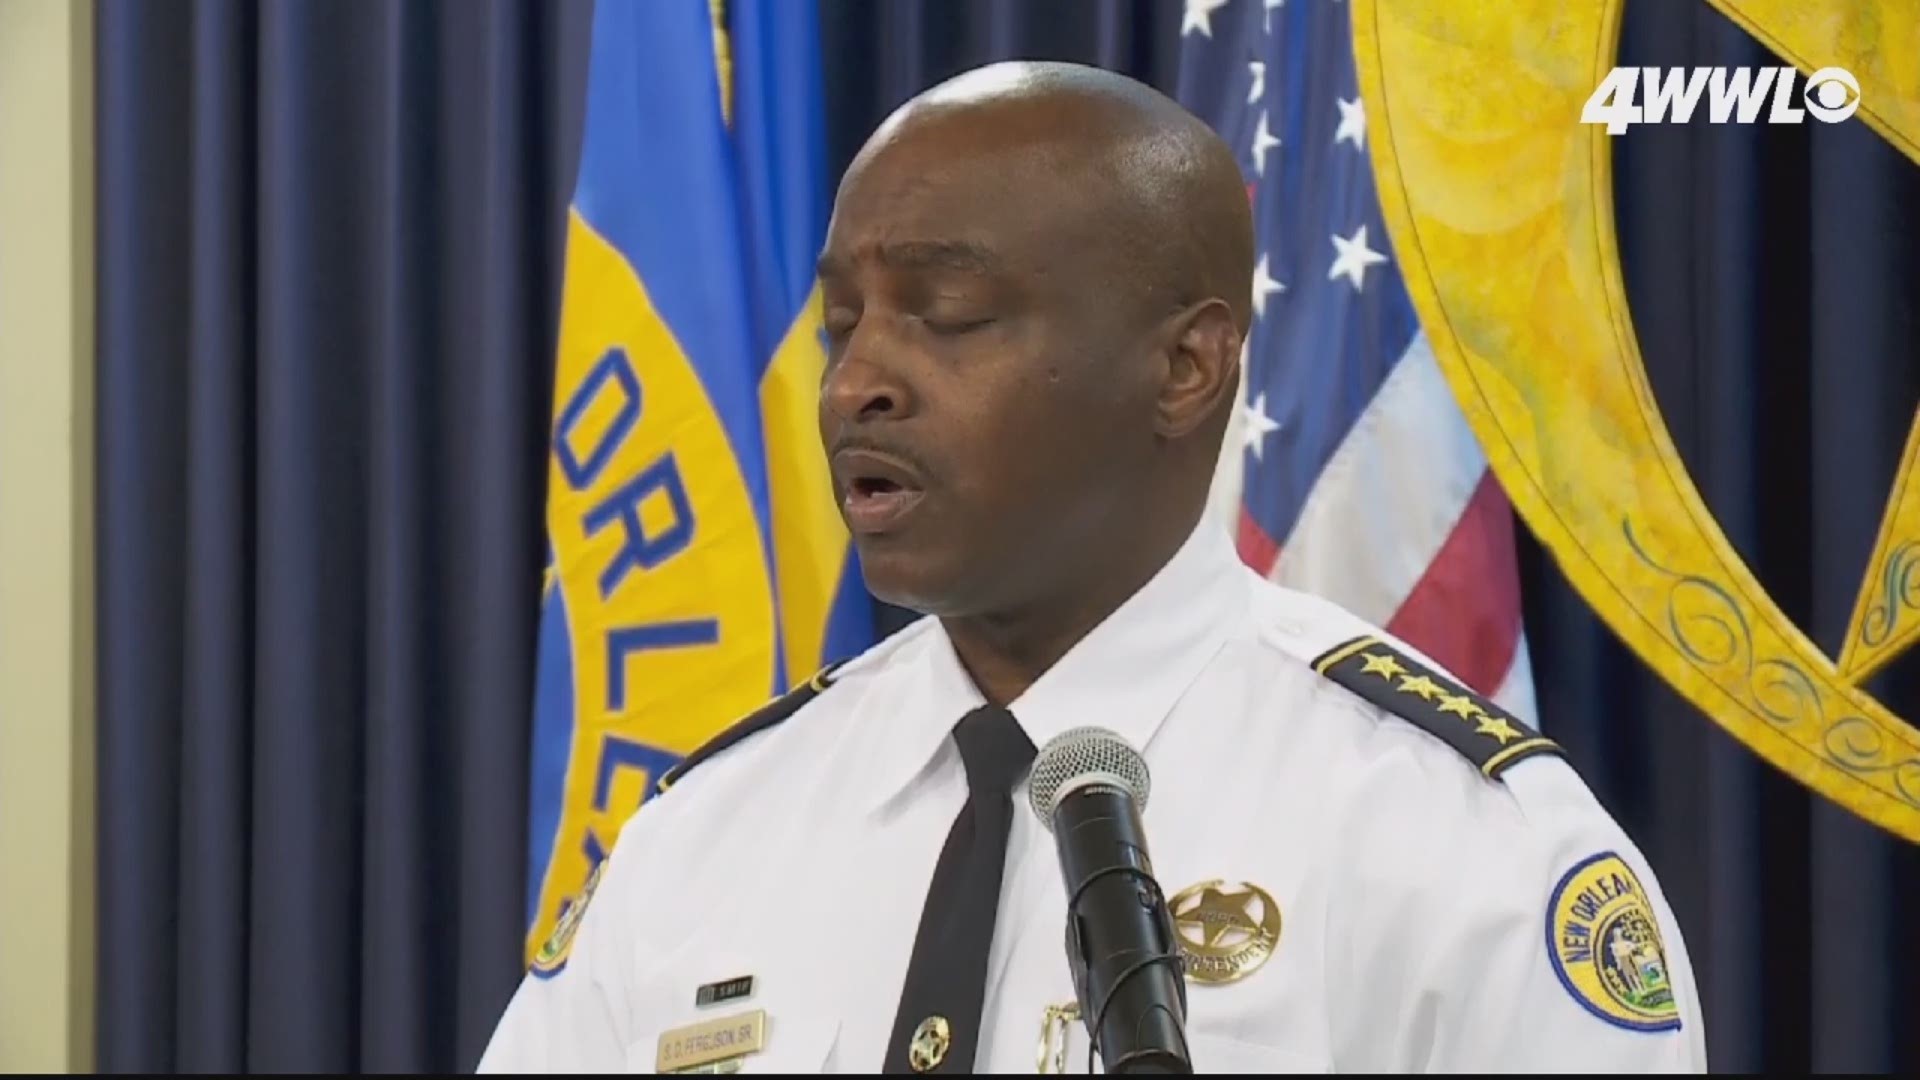 NOPD Chief Shaun Ferguson said that new safety rules will be discussed as early as Wednesday for next year's Carnival season.